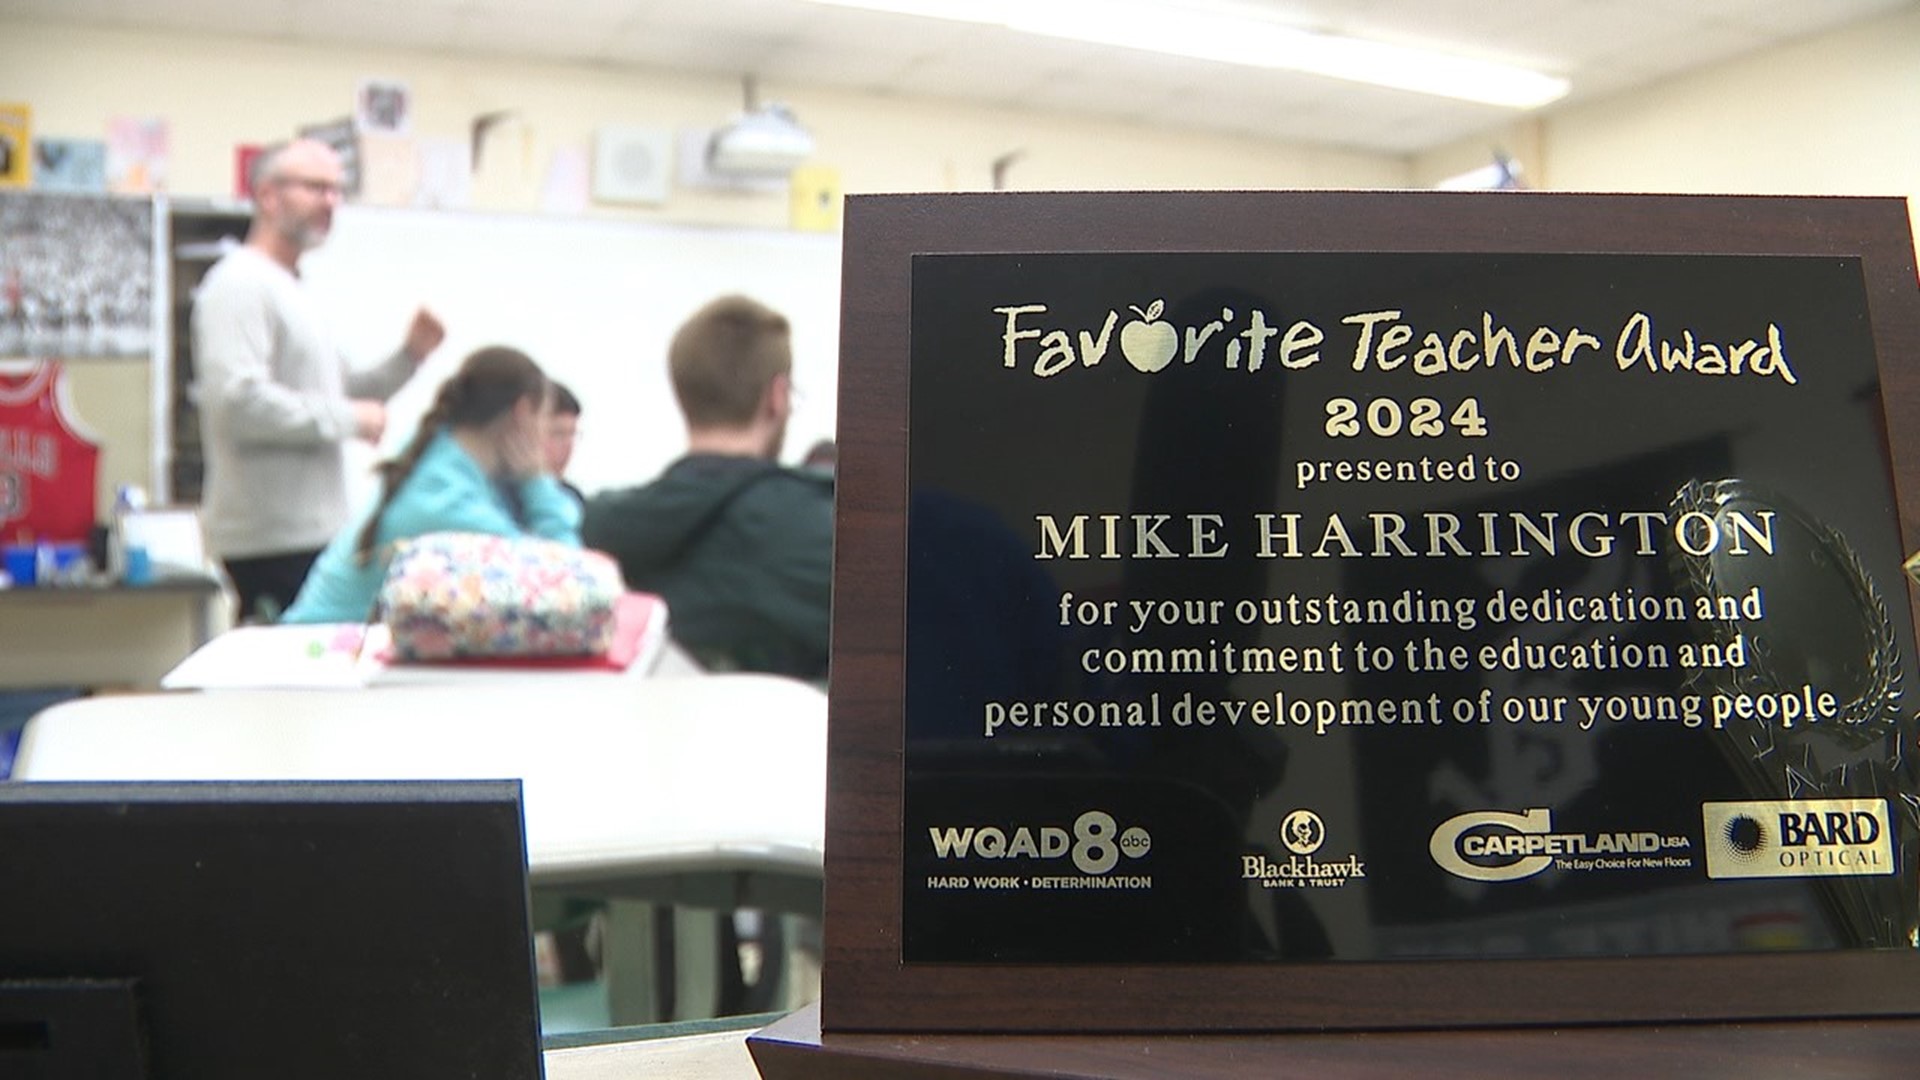 Teacher Mike Harrington continues to look for unique ways to inspire students in his classroom to pursue education careers.